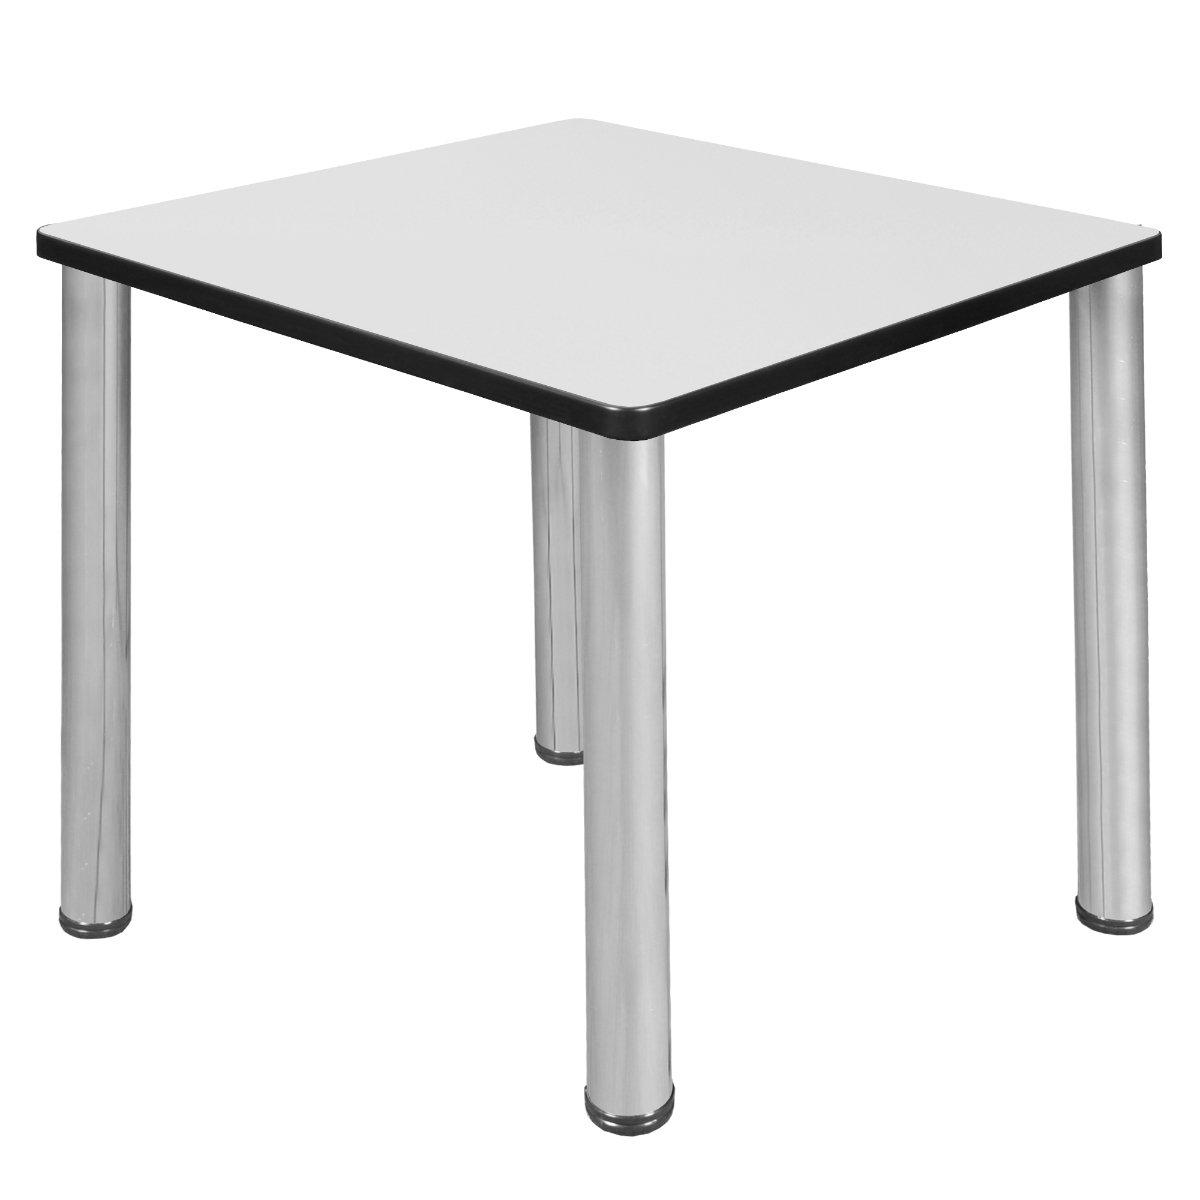 Kee 30" Square Post-Leg Breakroom Table, 29" Dining Height